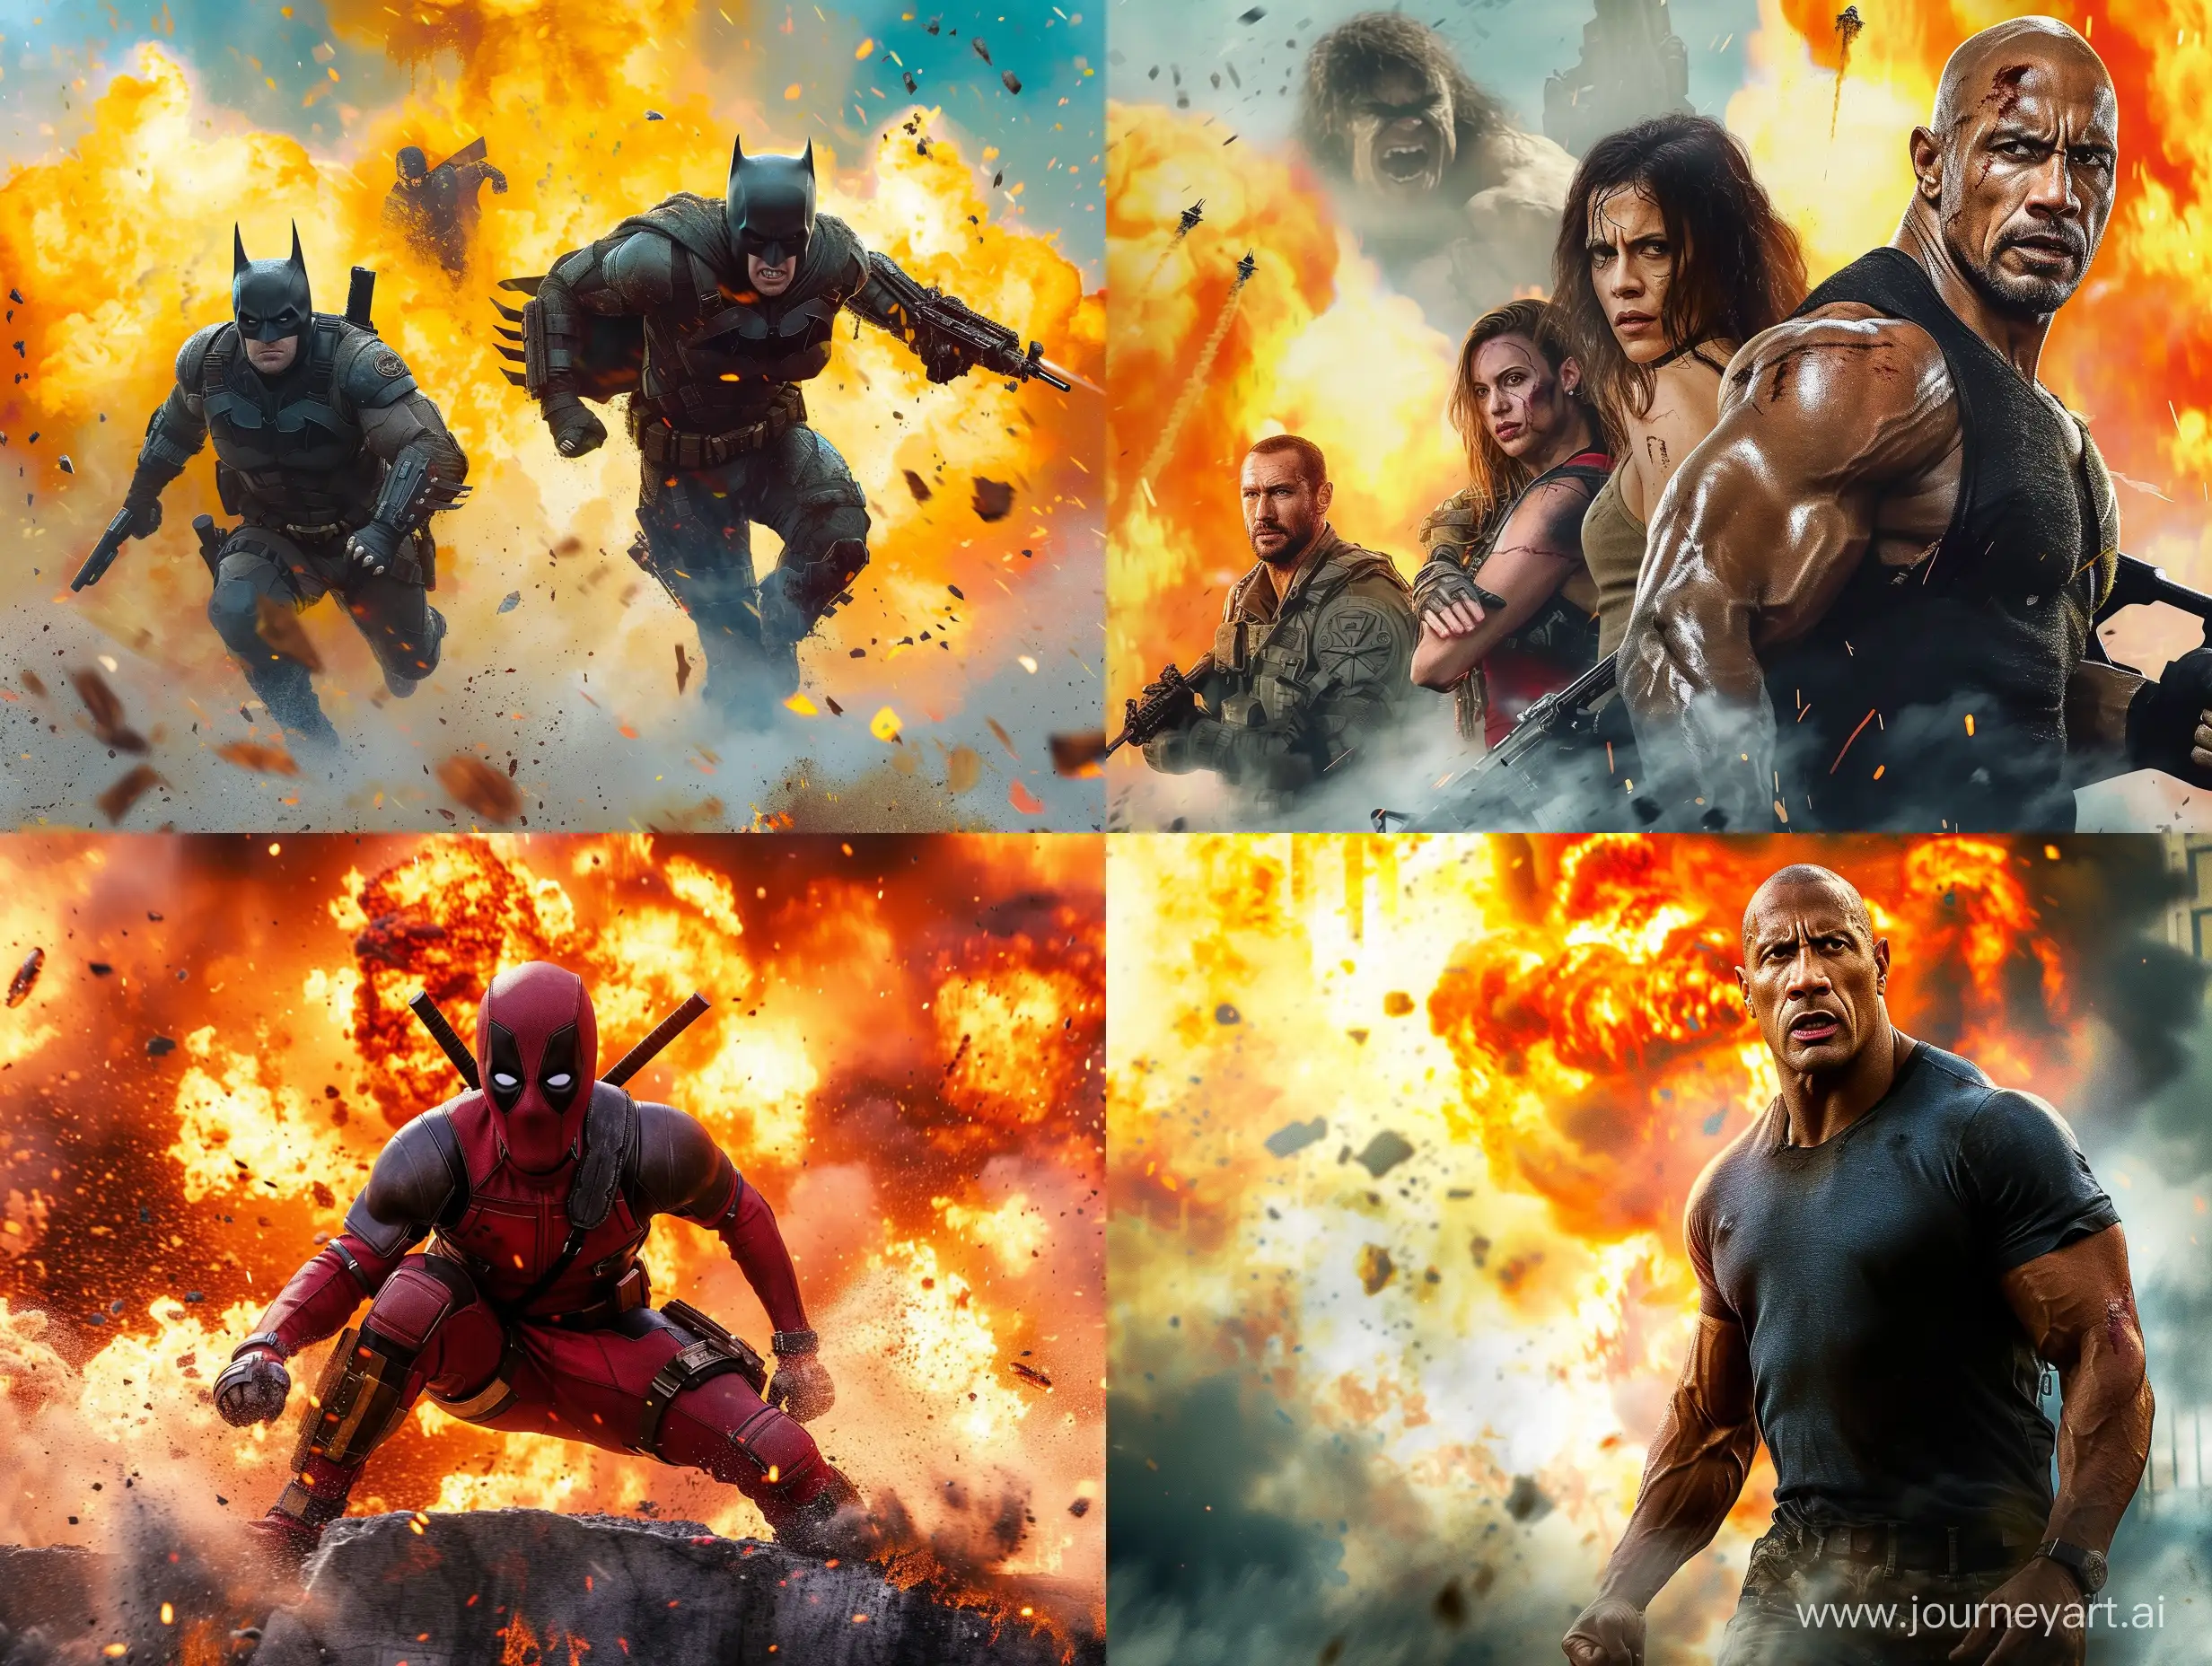 popular movie characters in badass pose and explosion in behind